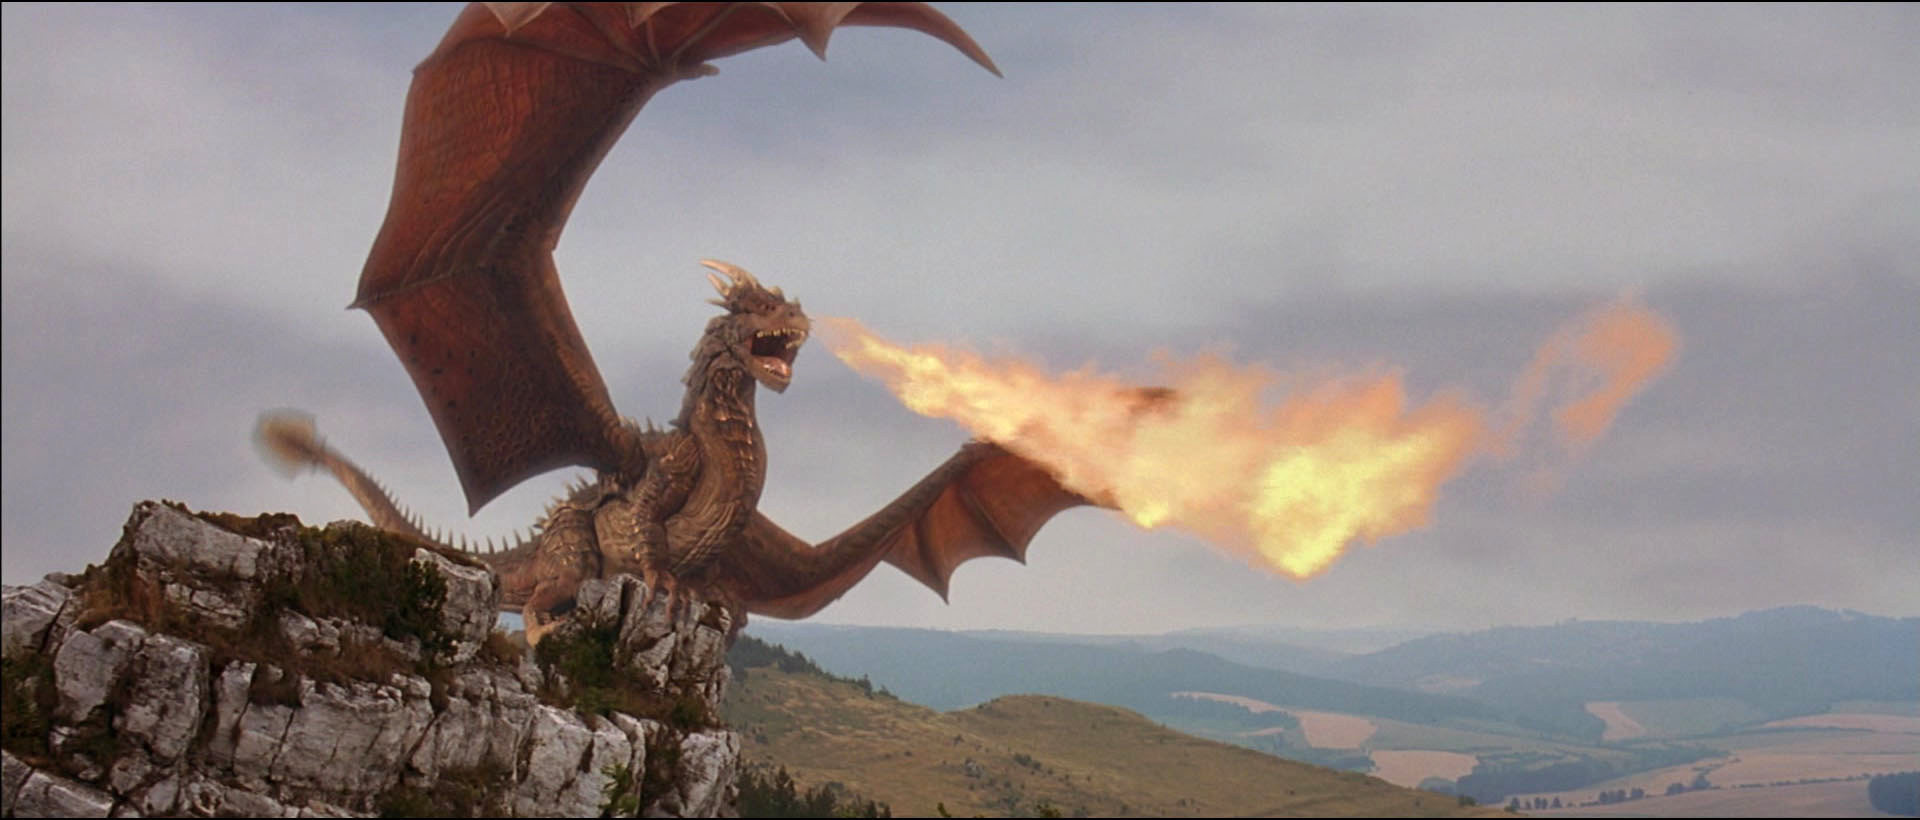 Dragonheart (1996) …review and/or viewer comments - Christian Spotlight ...